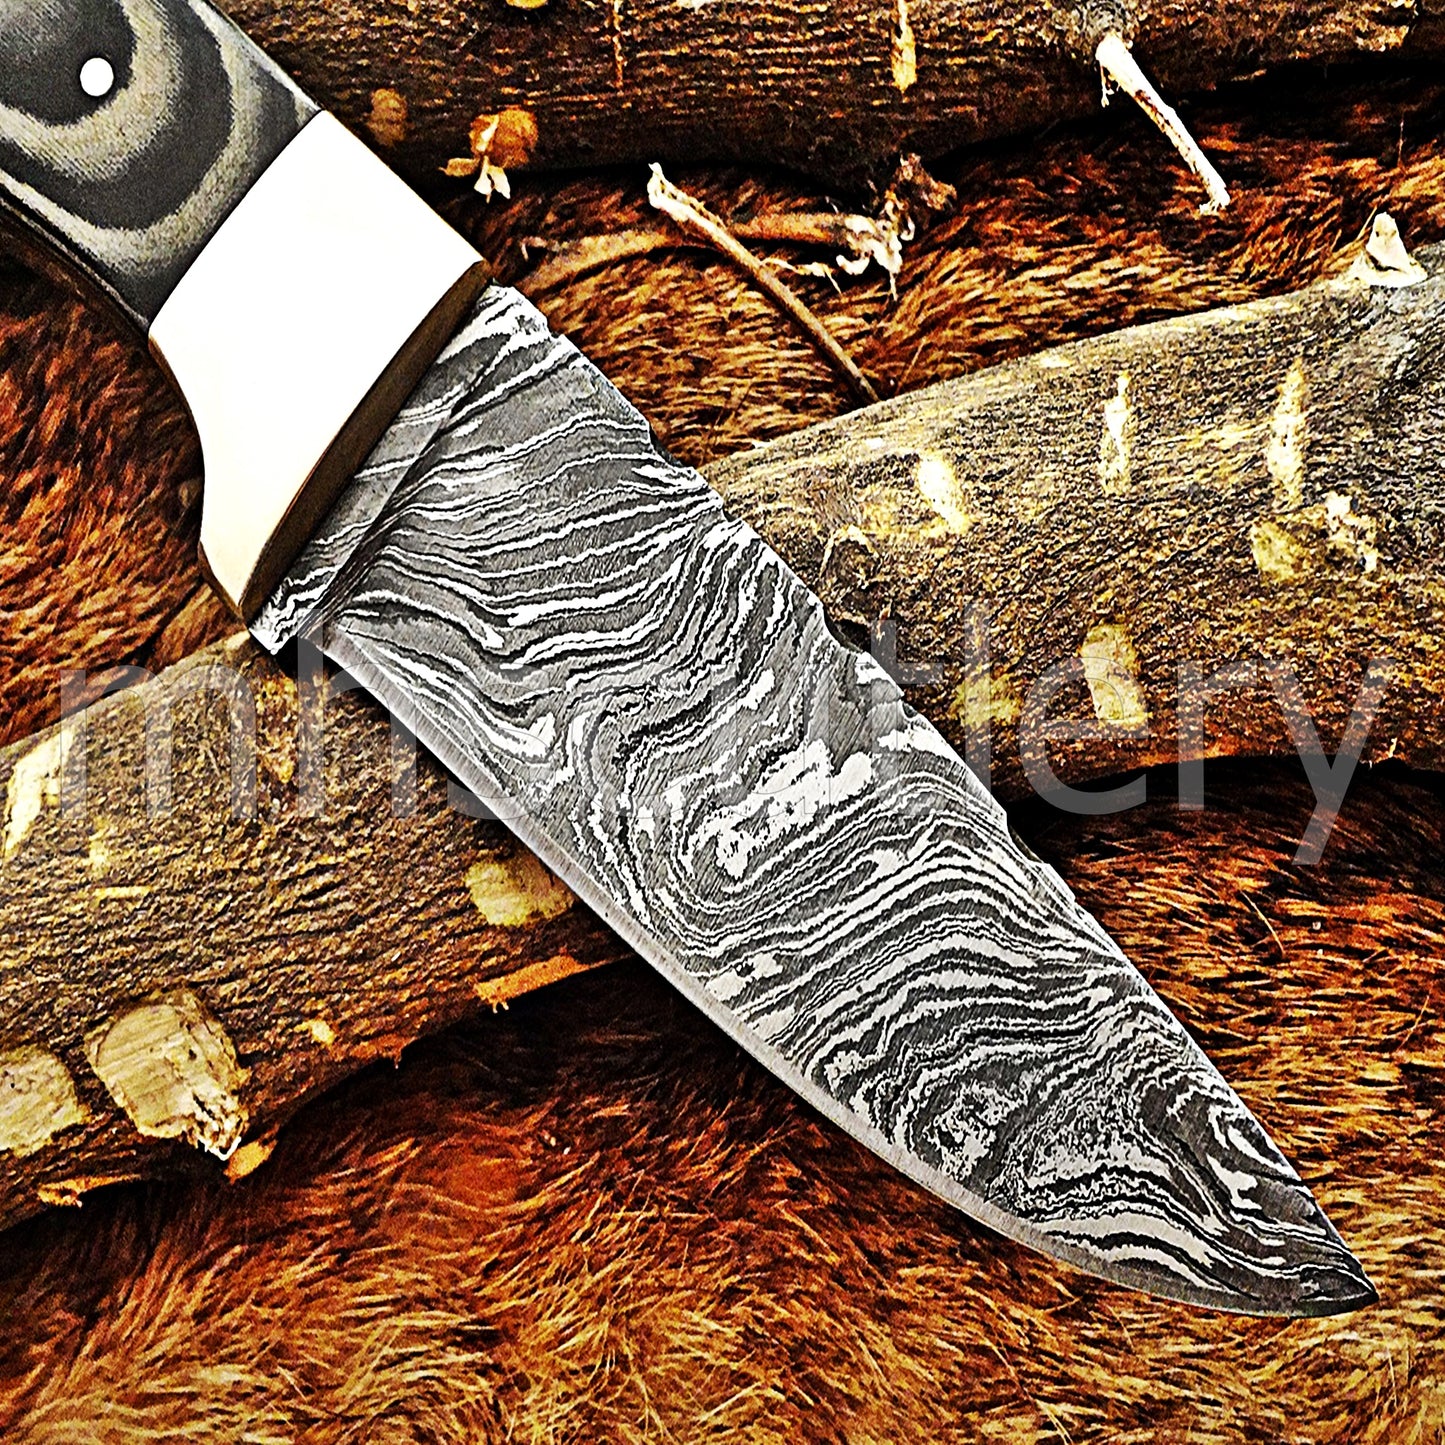 Damascus Steel Hunting Skinner Fixed Blade With Micarta Handle | mhscutlery